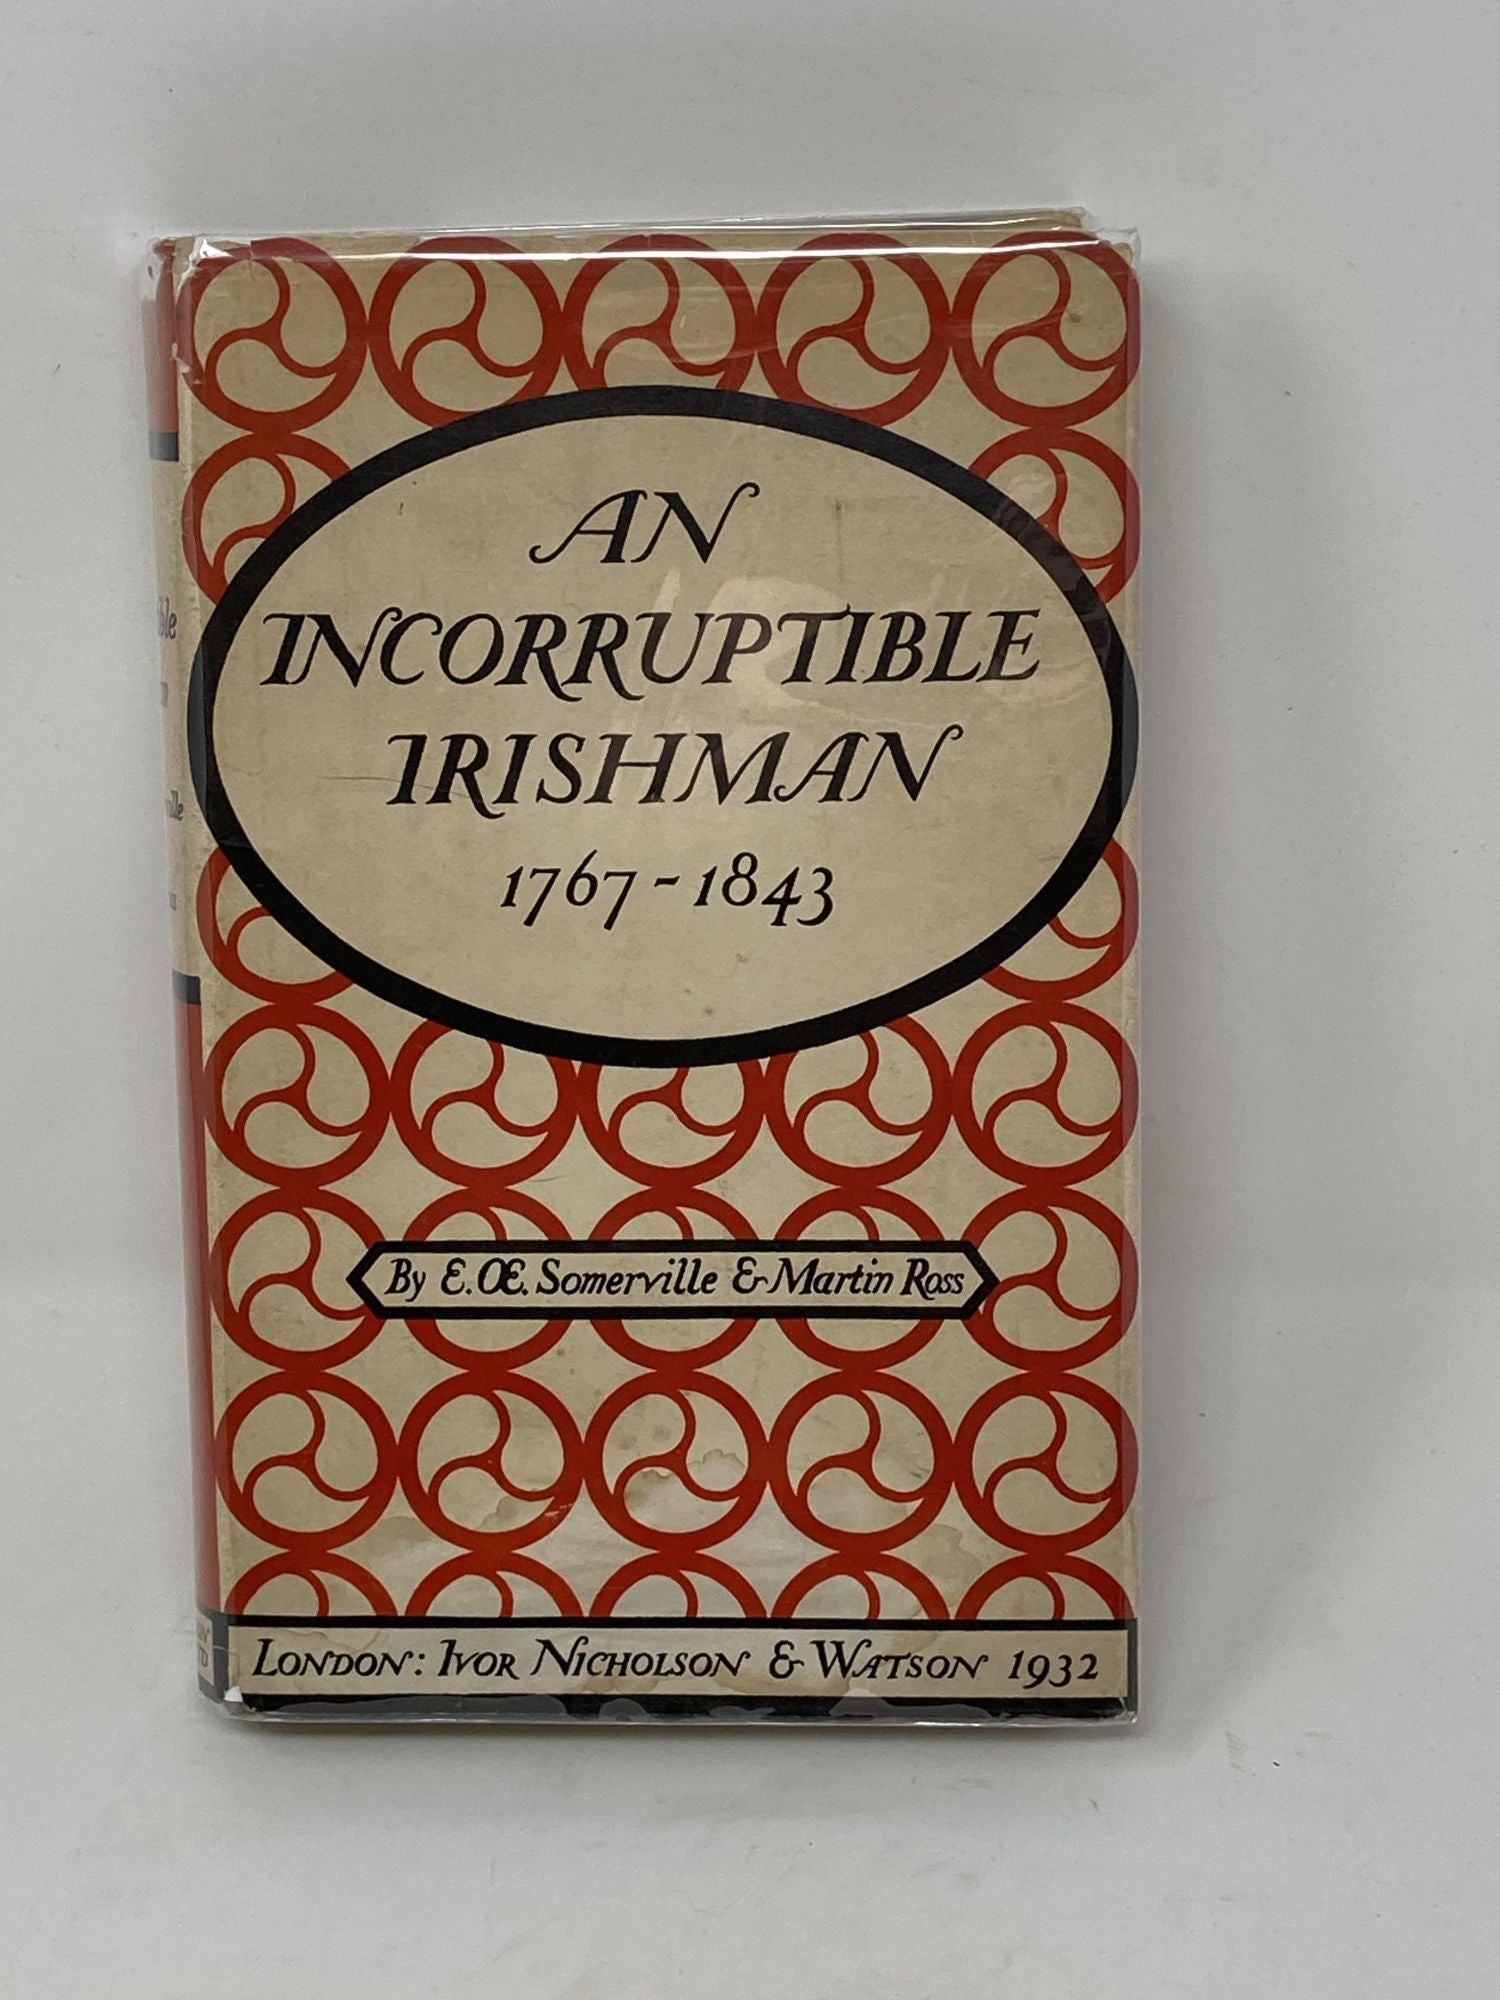 Somerville, E. OE. and Martin Ross - An Incorruptible Irishman, Being an Account of Chief Justice Charles Kendal Bushe, and of His Wife, Nancy Crampton, and Their Times, 1767-1843